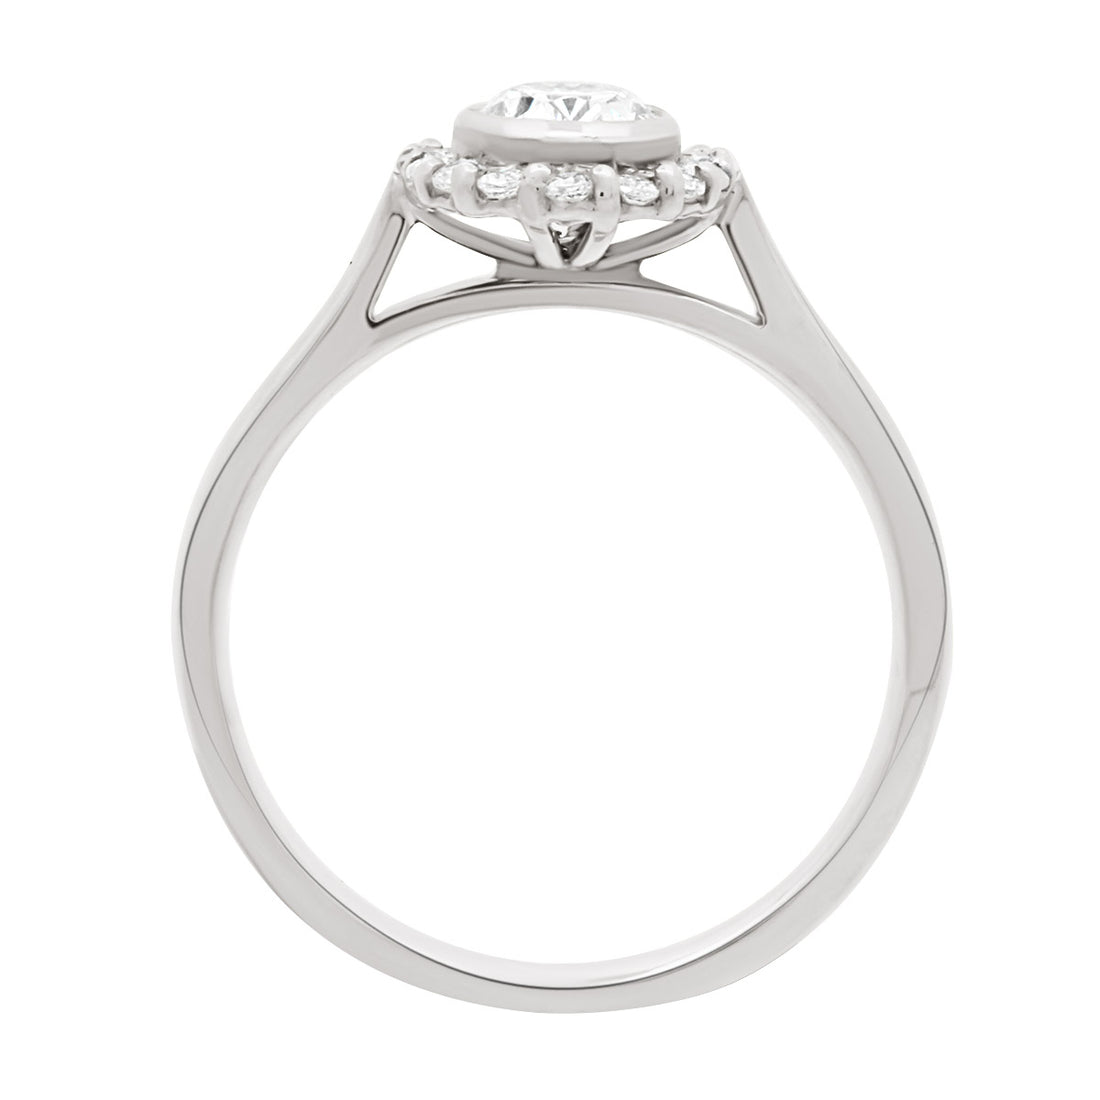  Oval Halo Diamond Ring in white gold standing upright